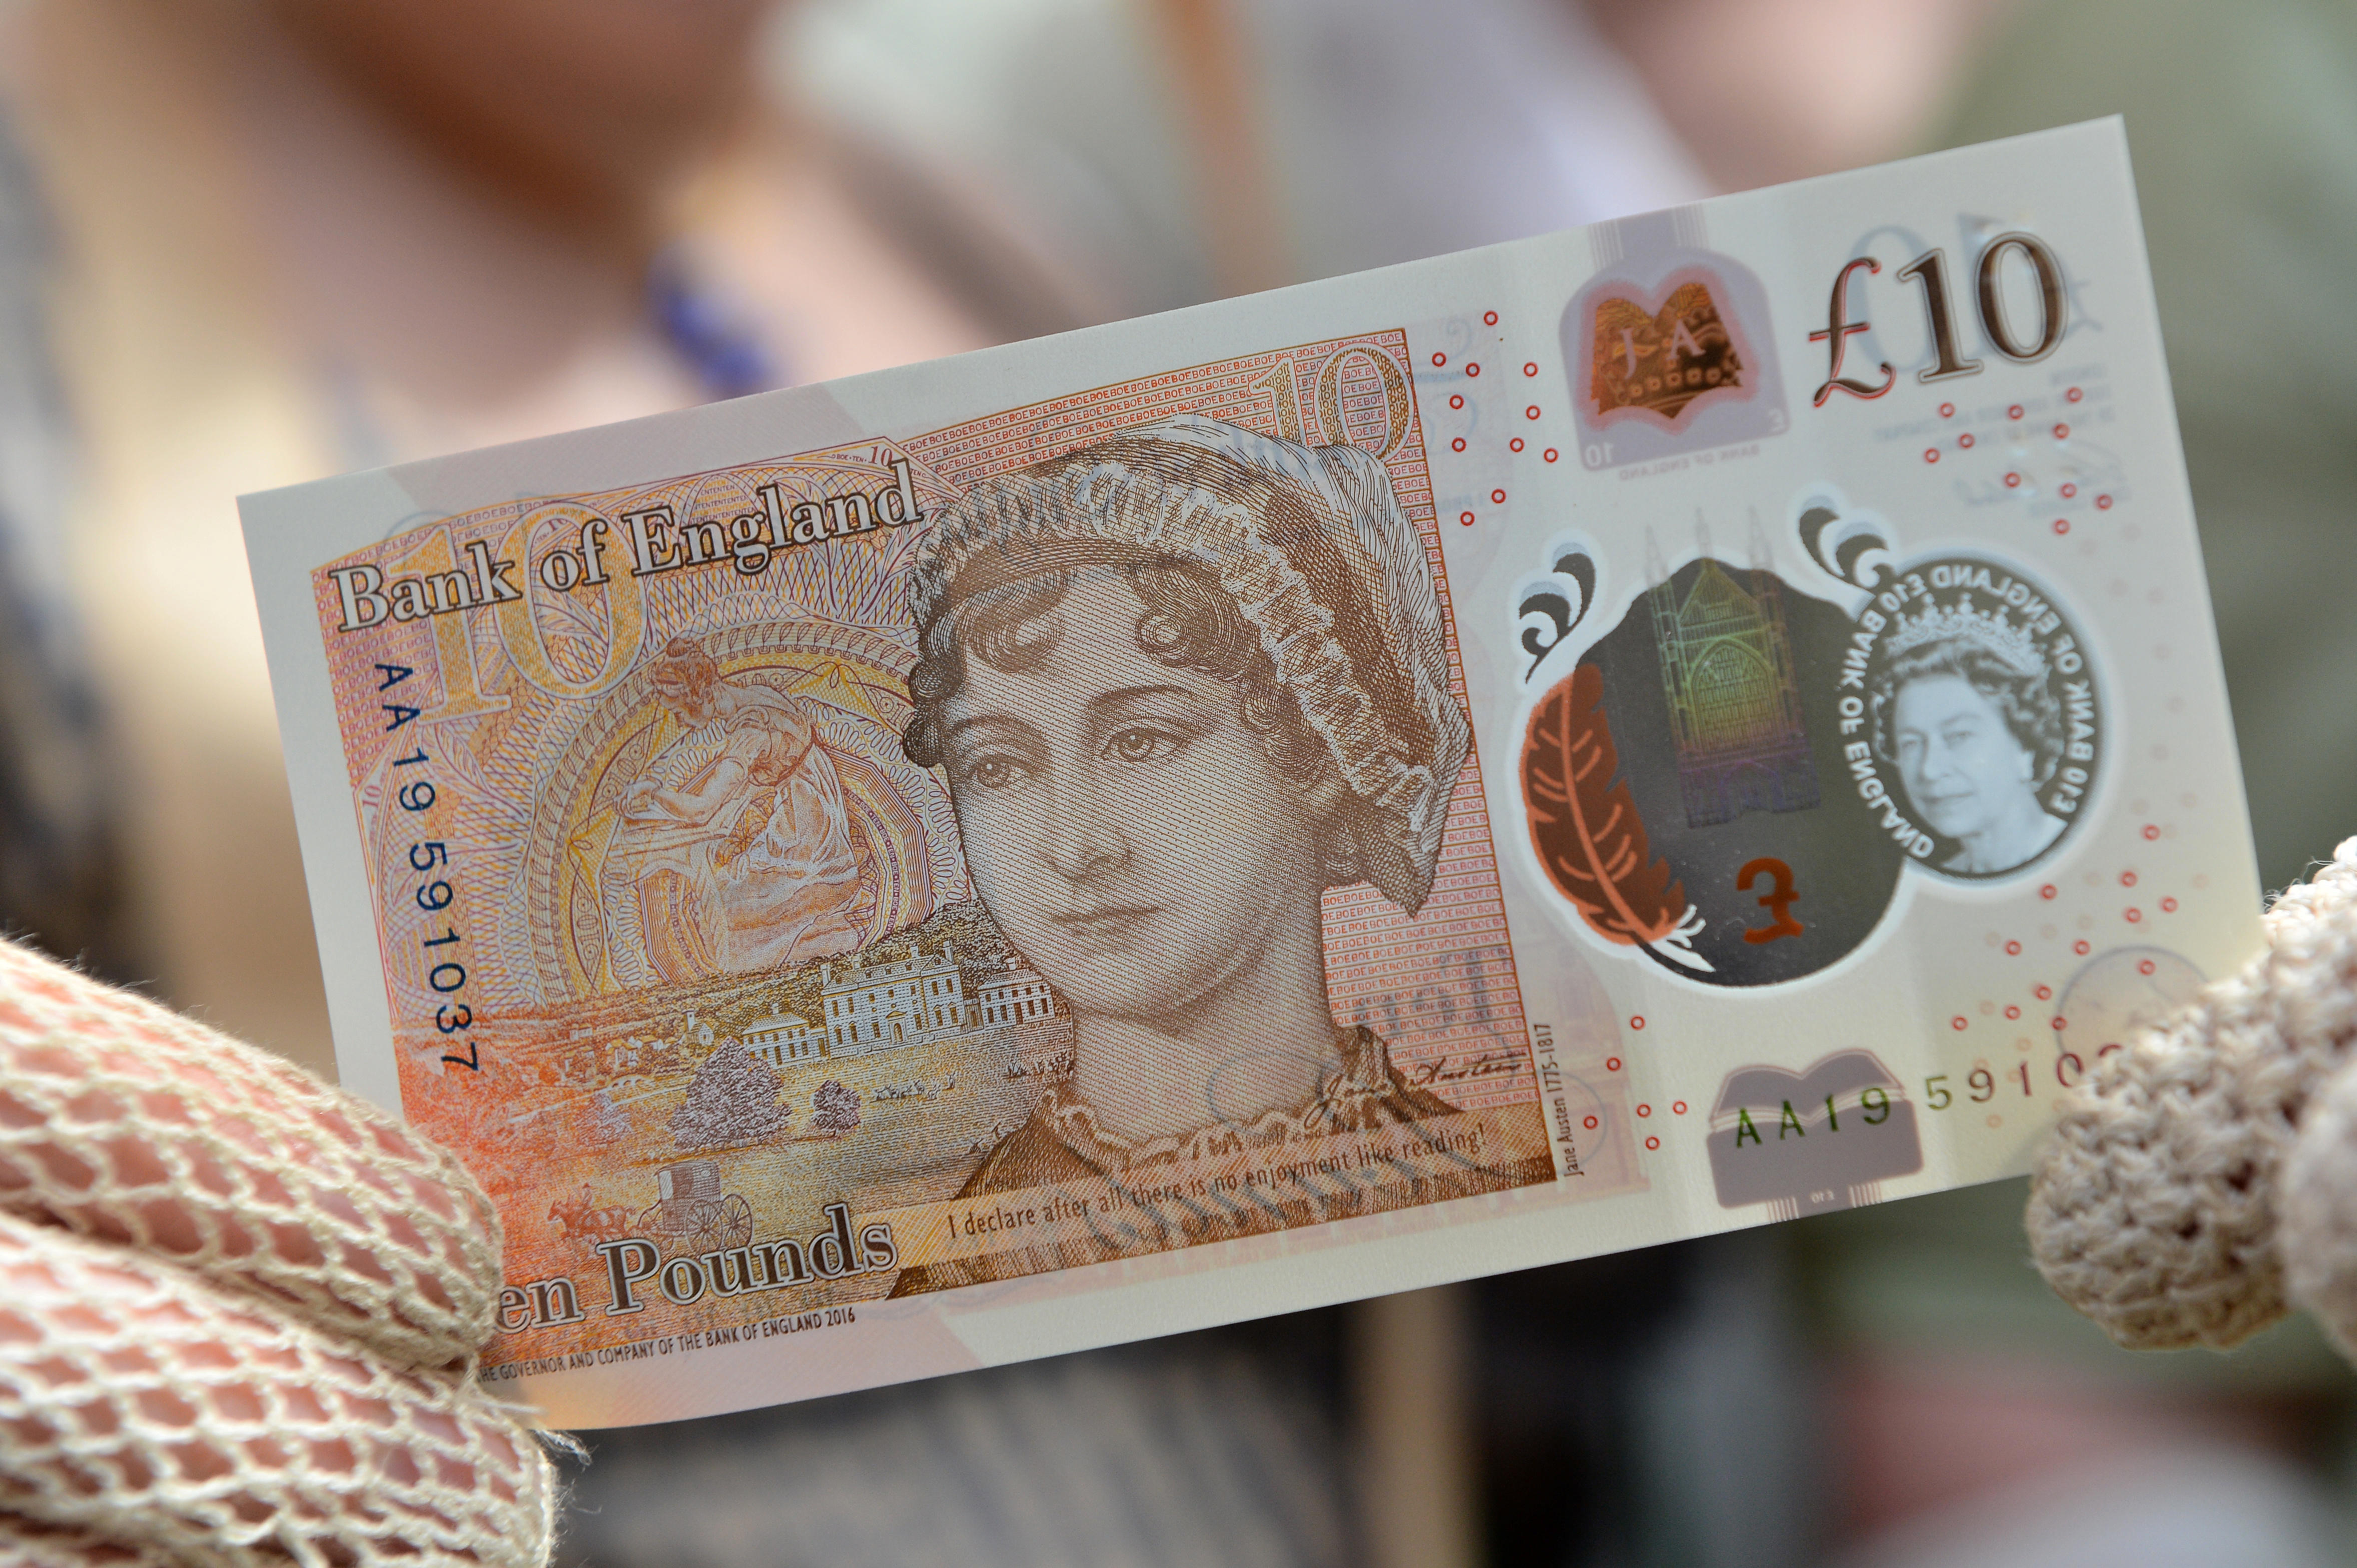 10-pound-note-featuring-jane-austen-unveiled-on-anniversary-of-her